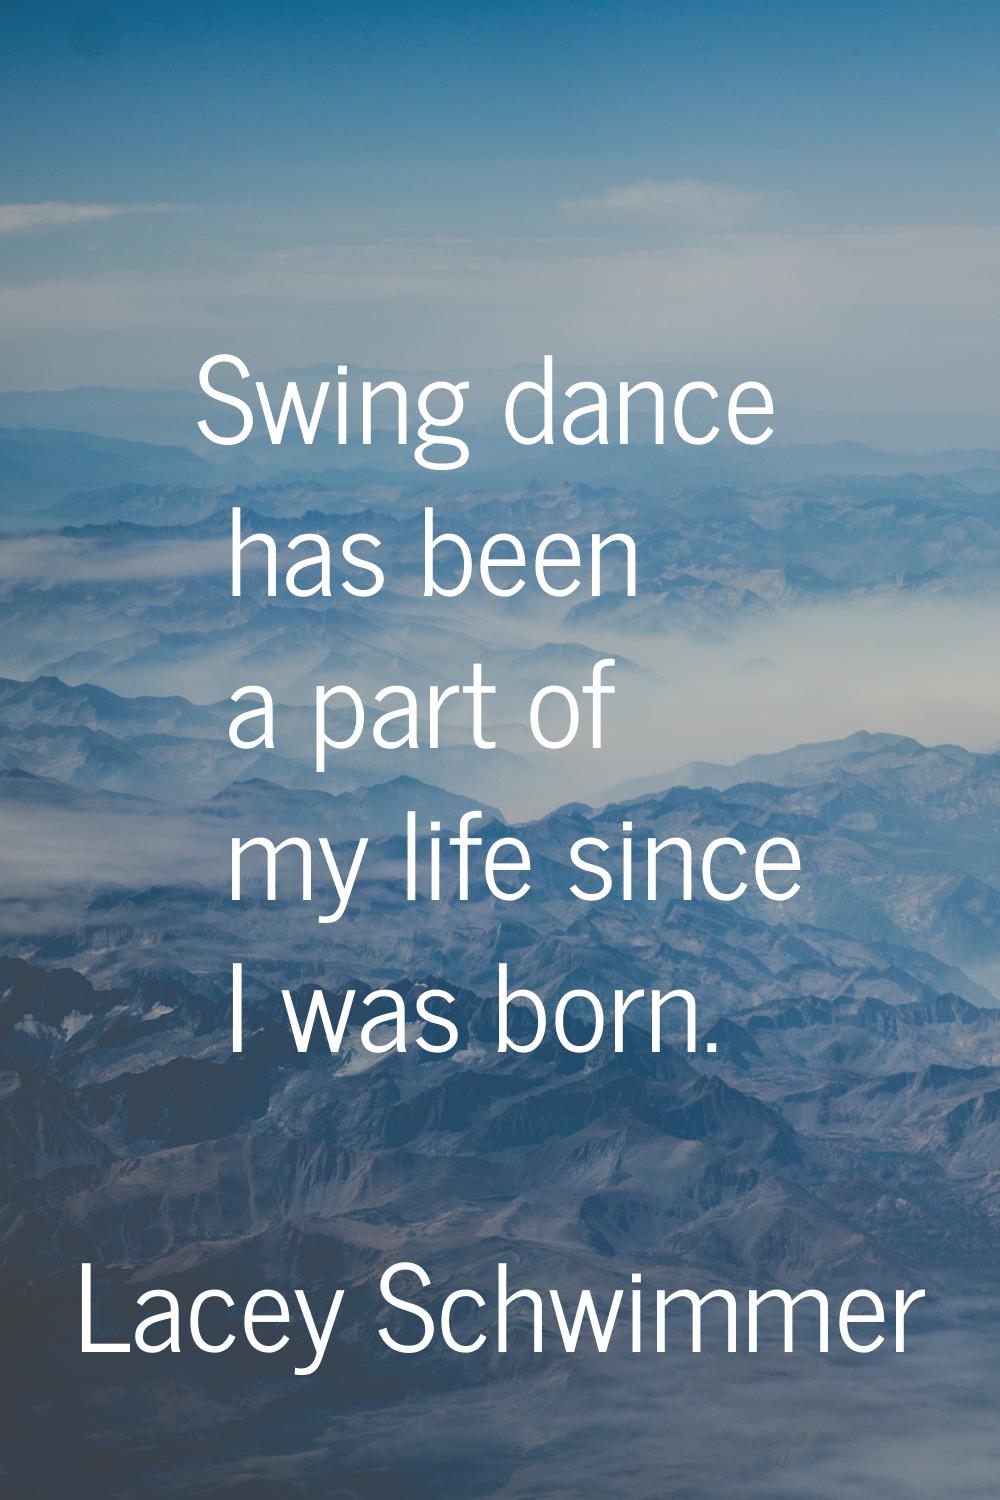 Swing dance has been a part of my life since I was born.